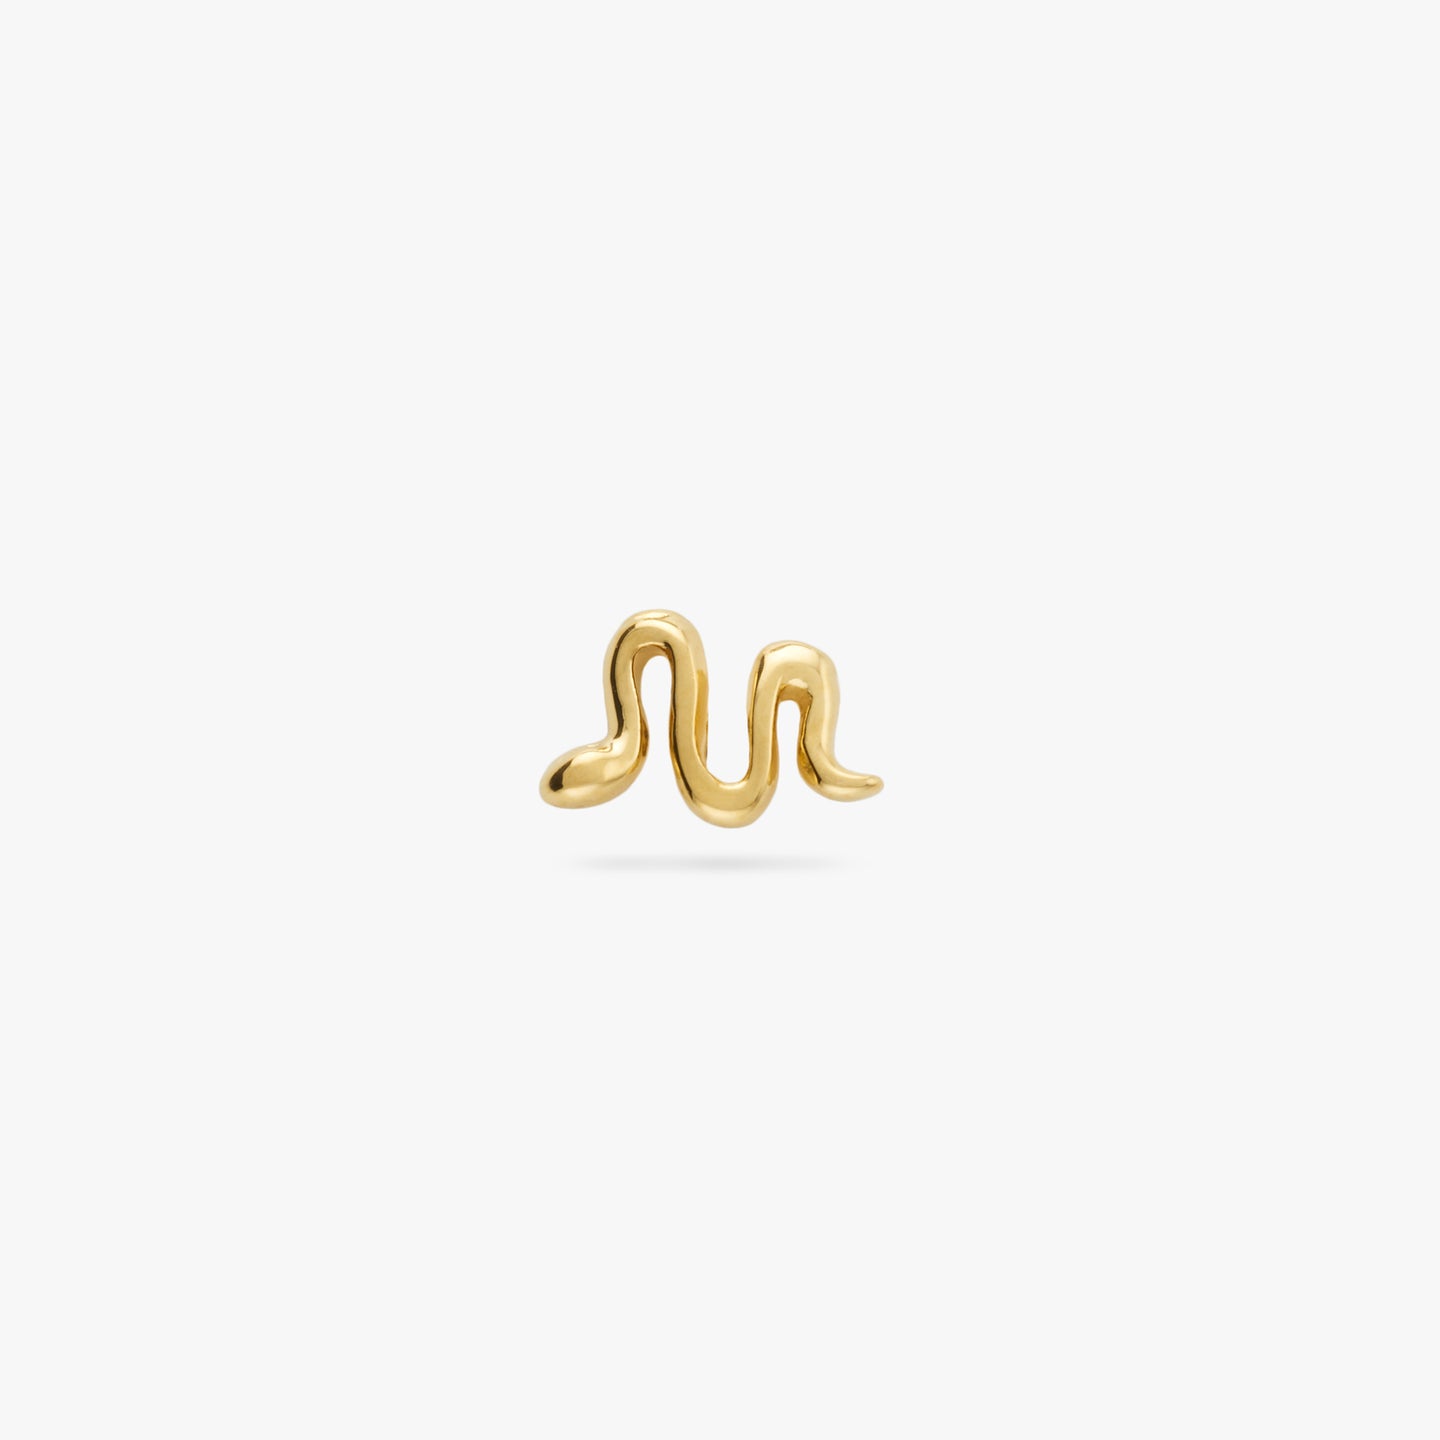 This is a small gold stud in the shape of a snake color:null|gold